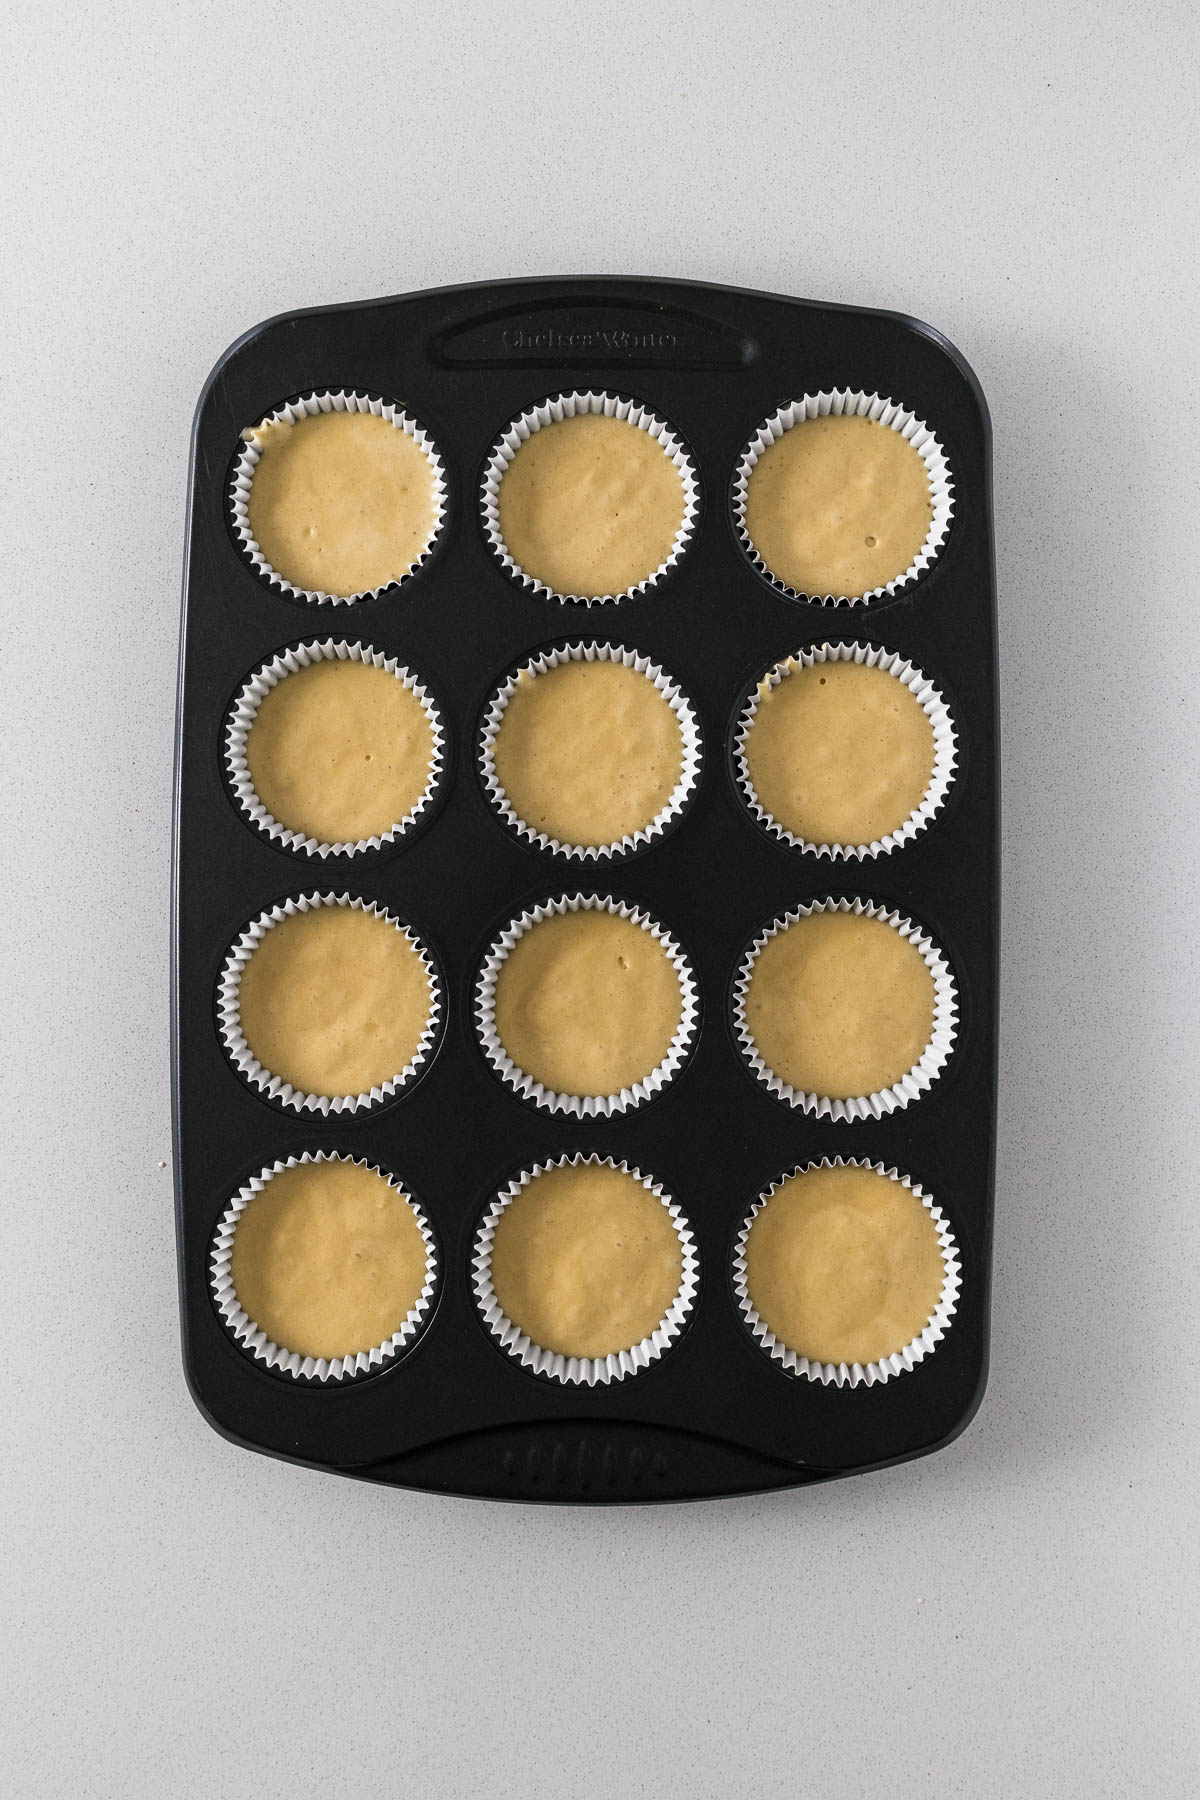 Step 6 - cupcake batter divided into 12 cupcake liners.